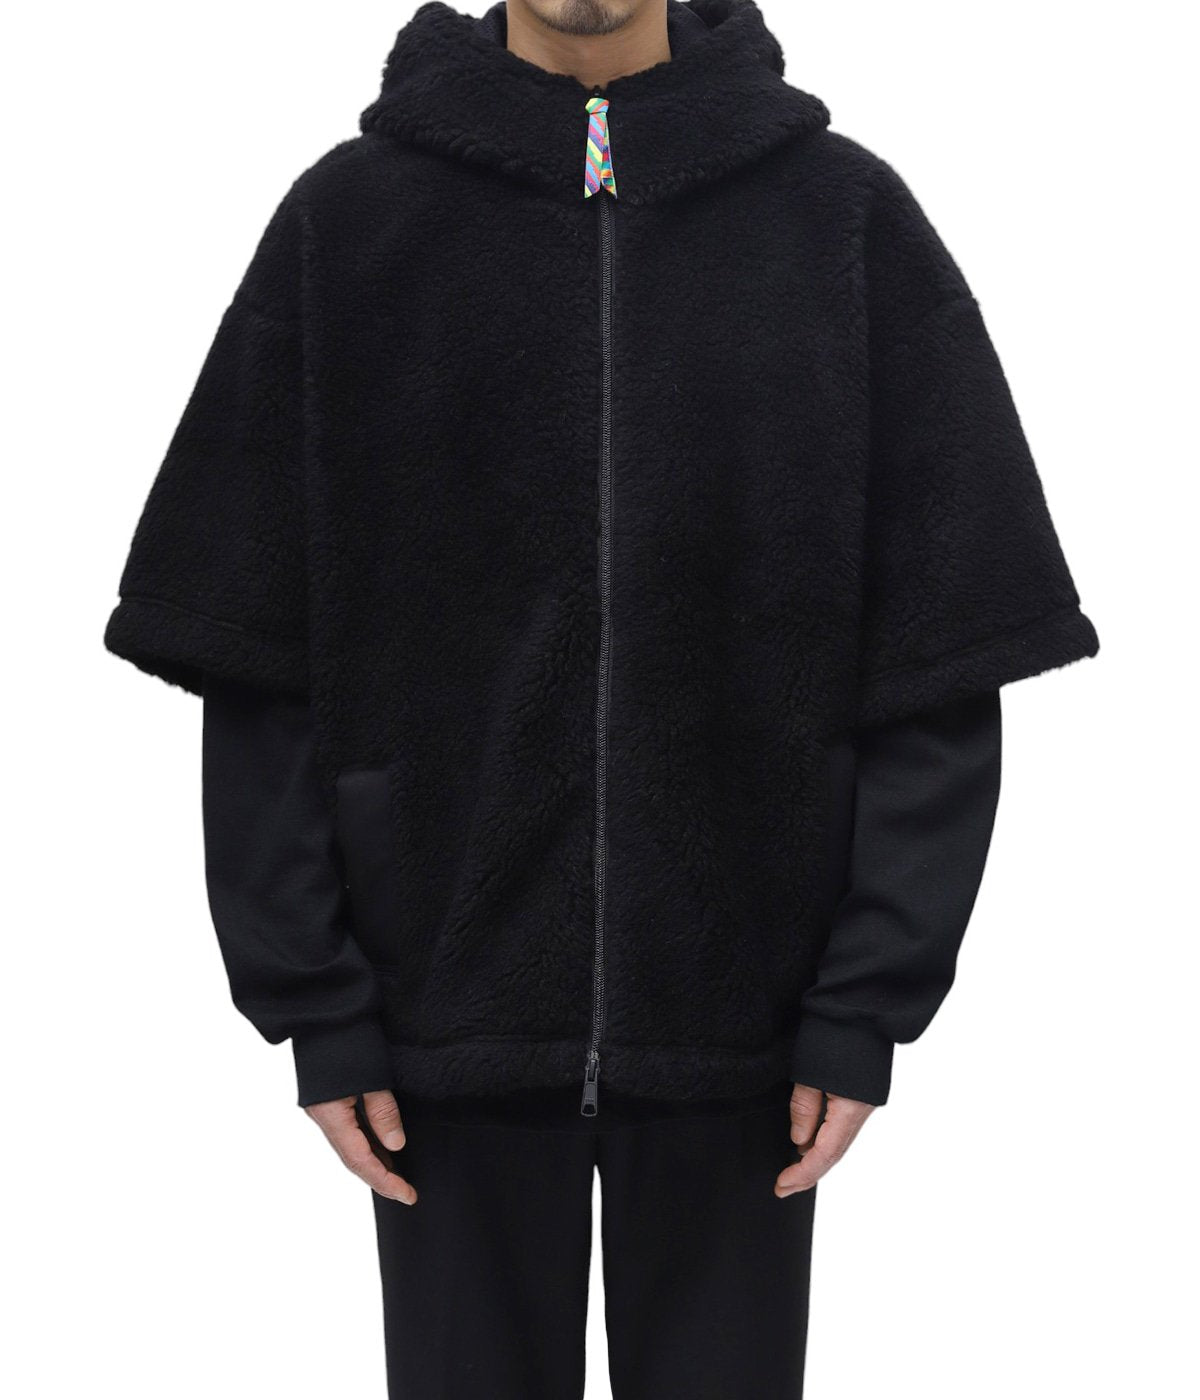 Y(dot) BY NORDISK / THM FLEECE HOODIE is-ness x Y(dot) BY NORDISK